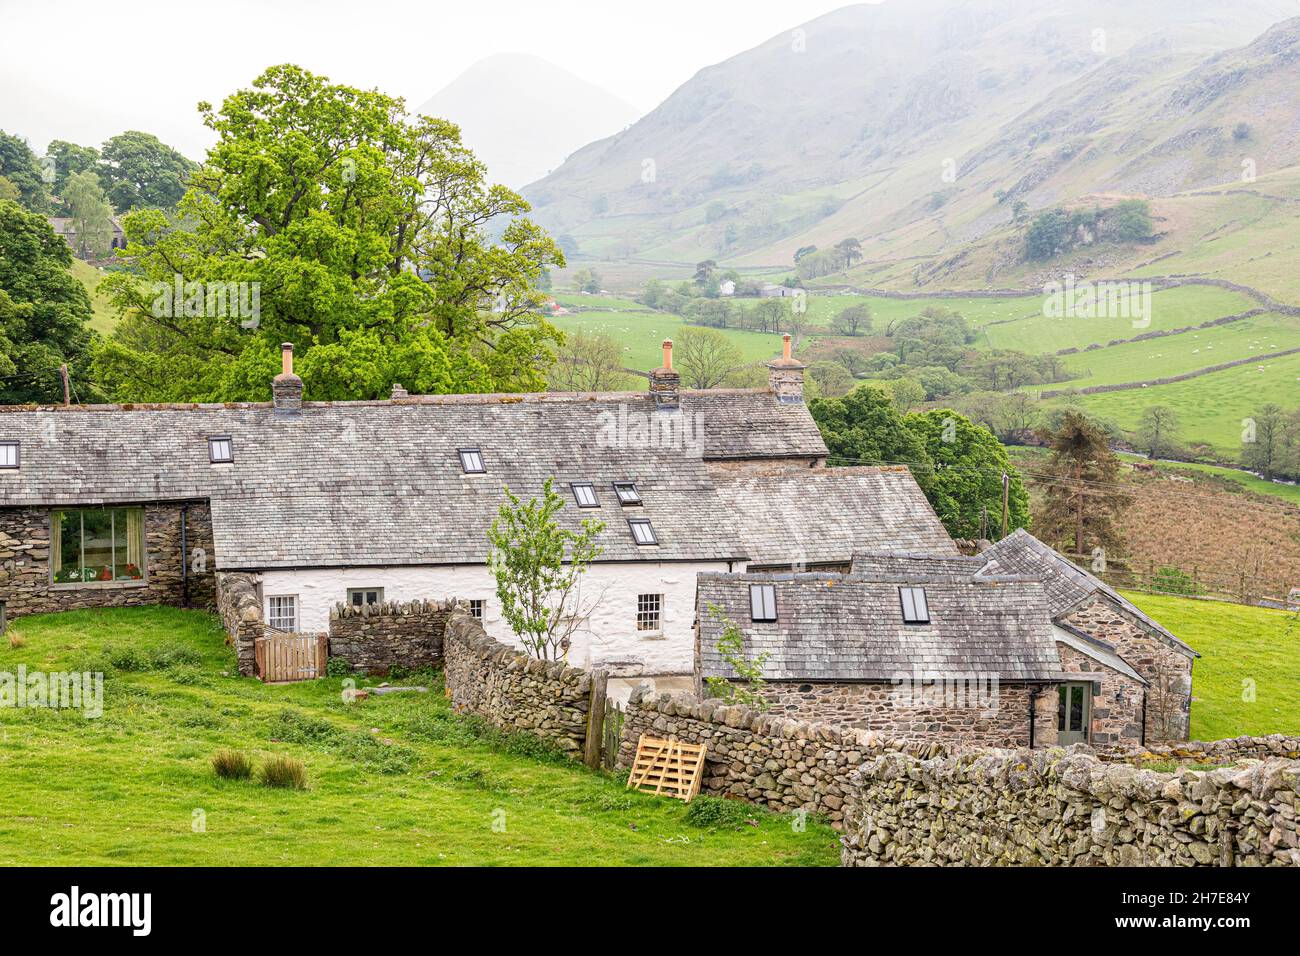 A typical English Lake District farm at Martindale, Cumbria UK Stock Photo